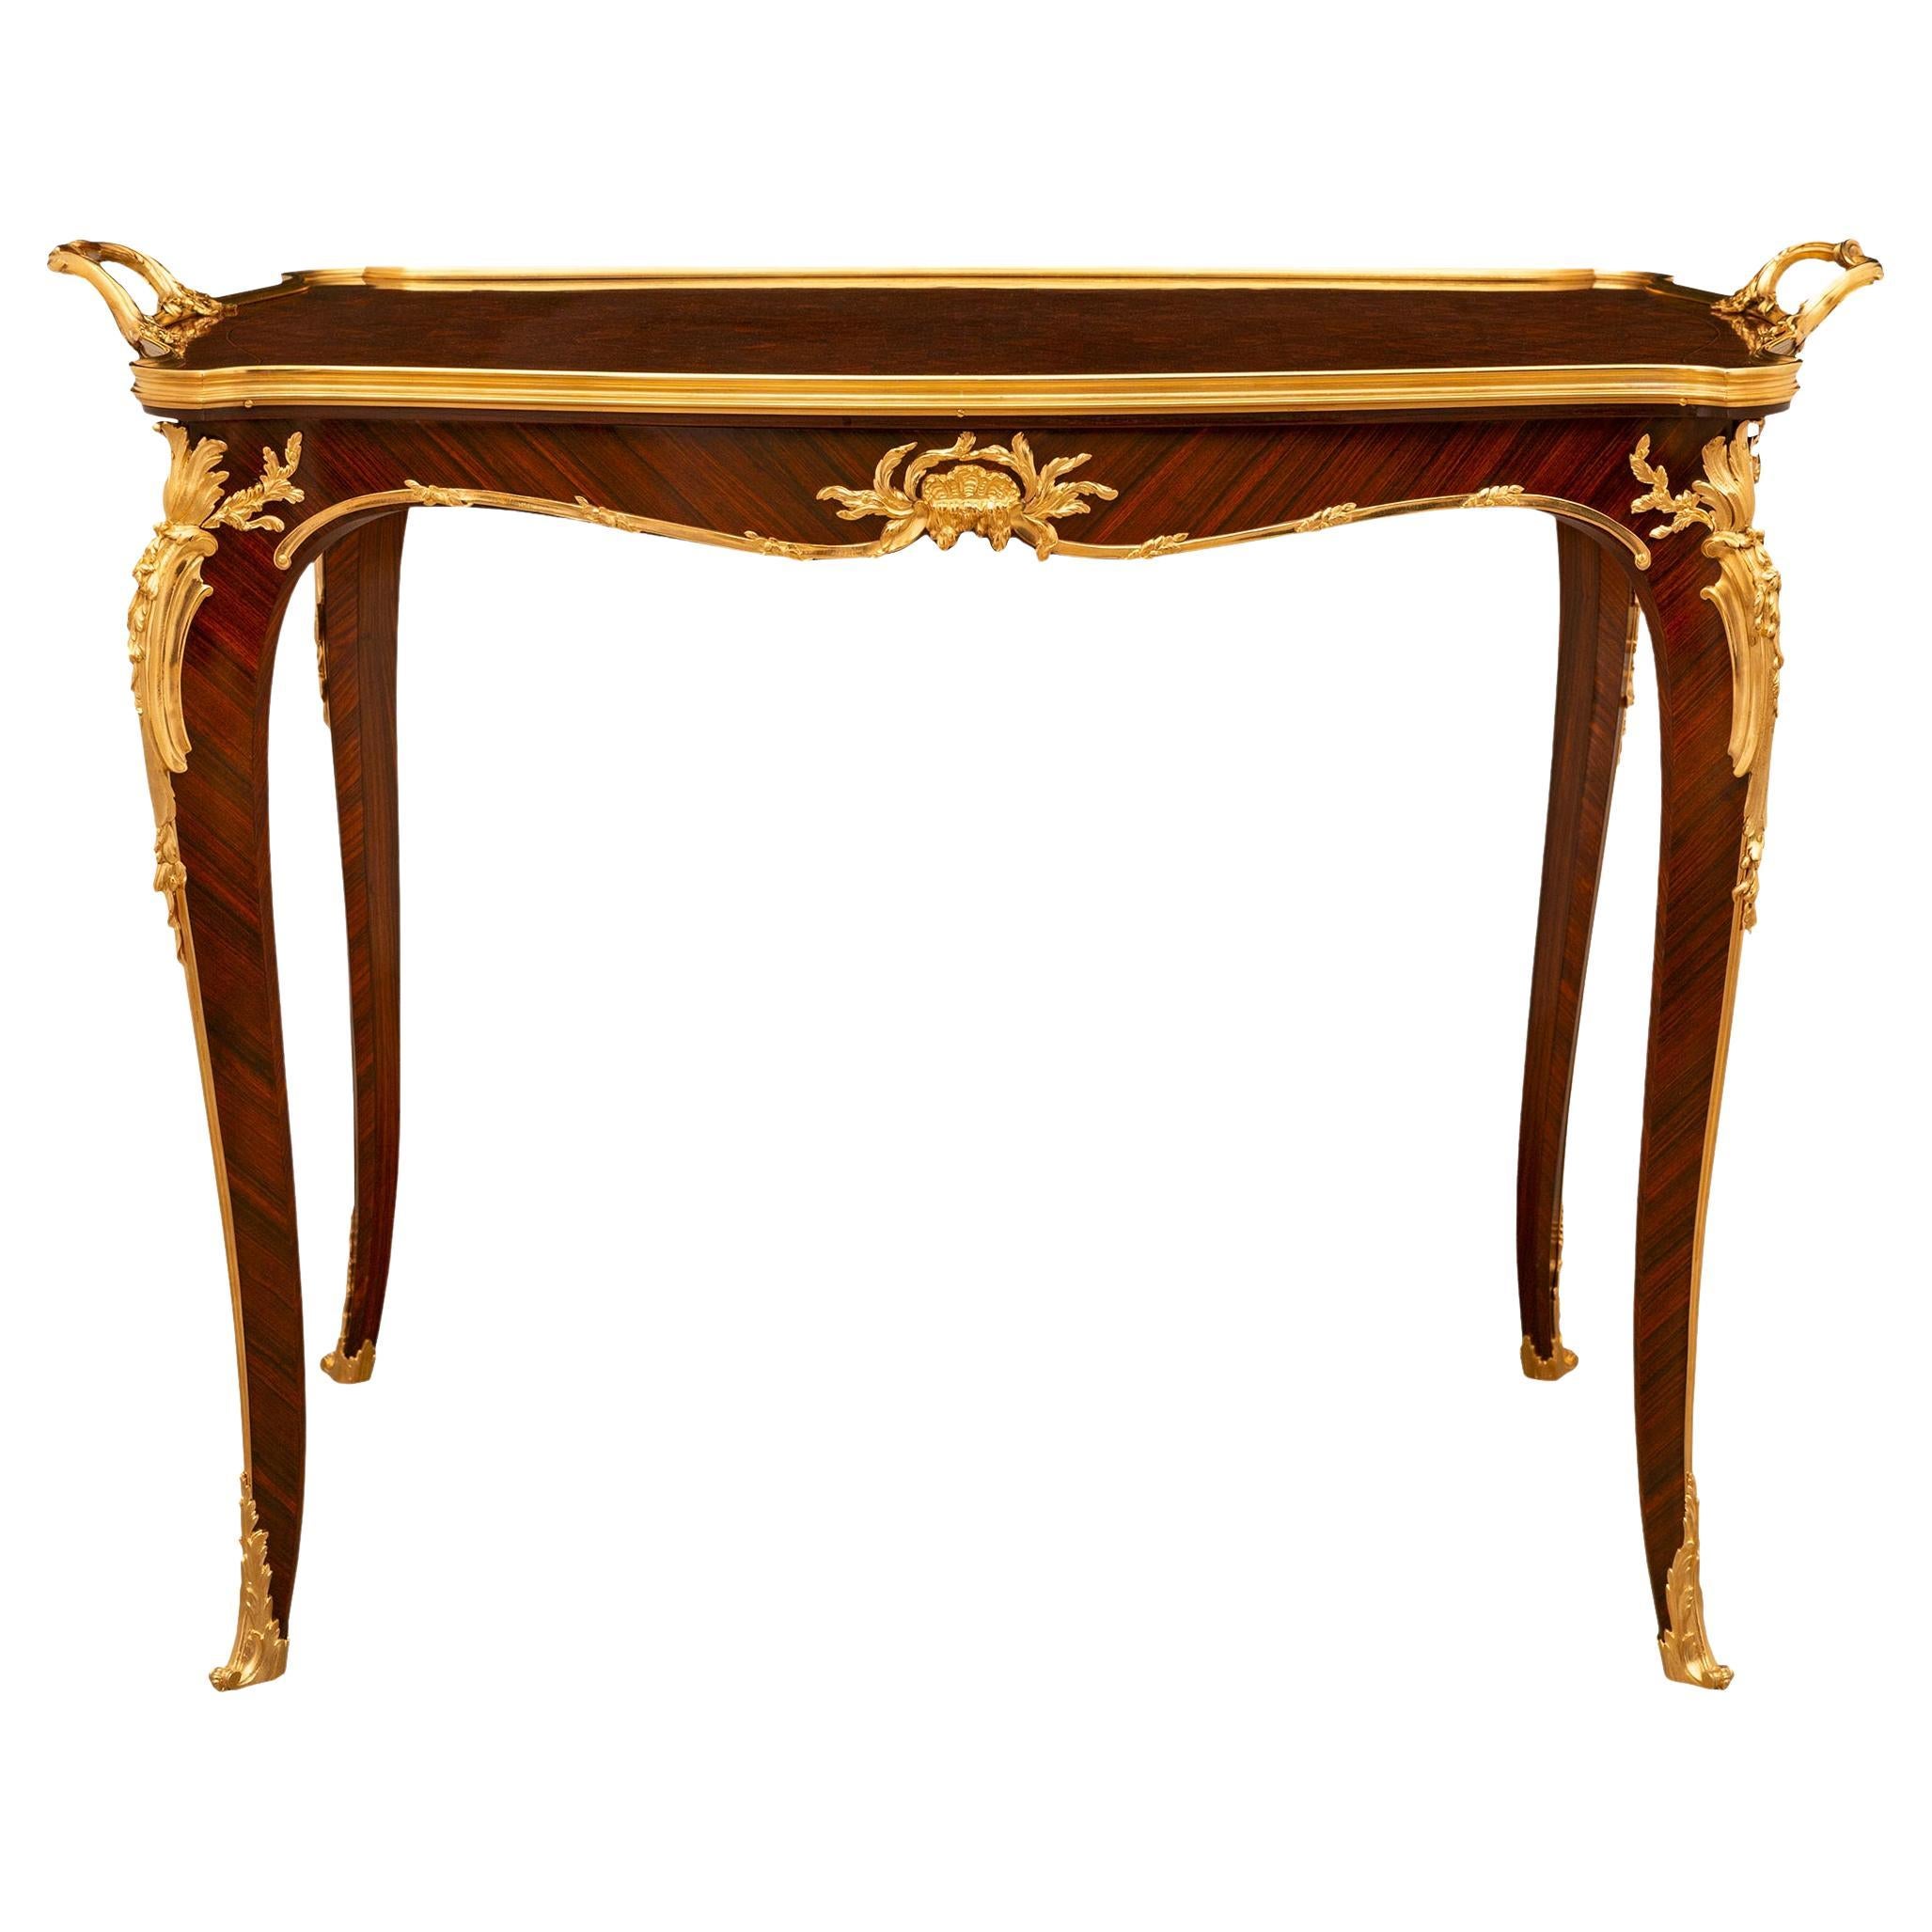 A French 19th century Louis XV st. coffee table attr to Francois Linke